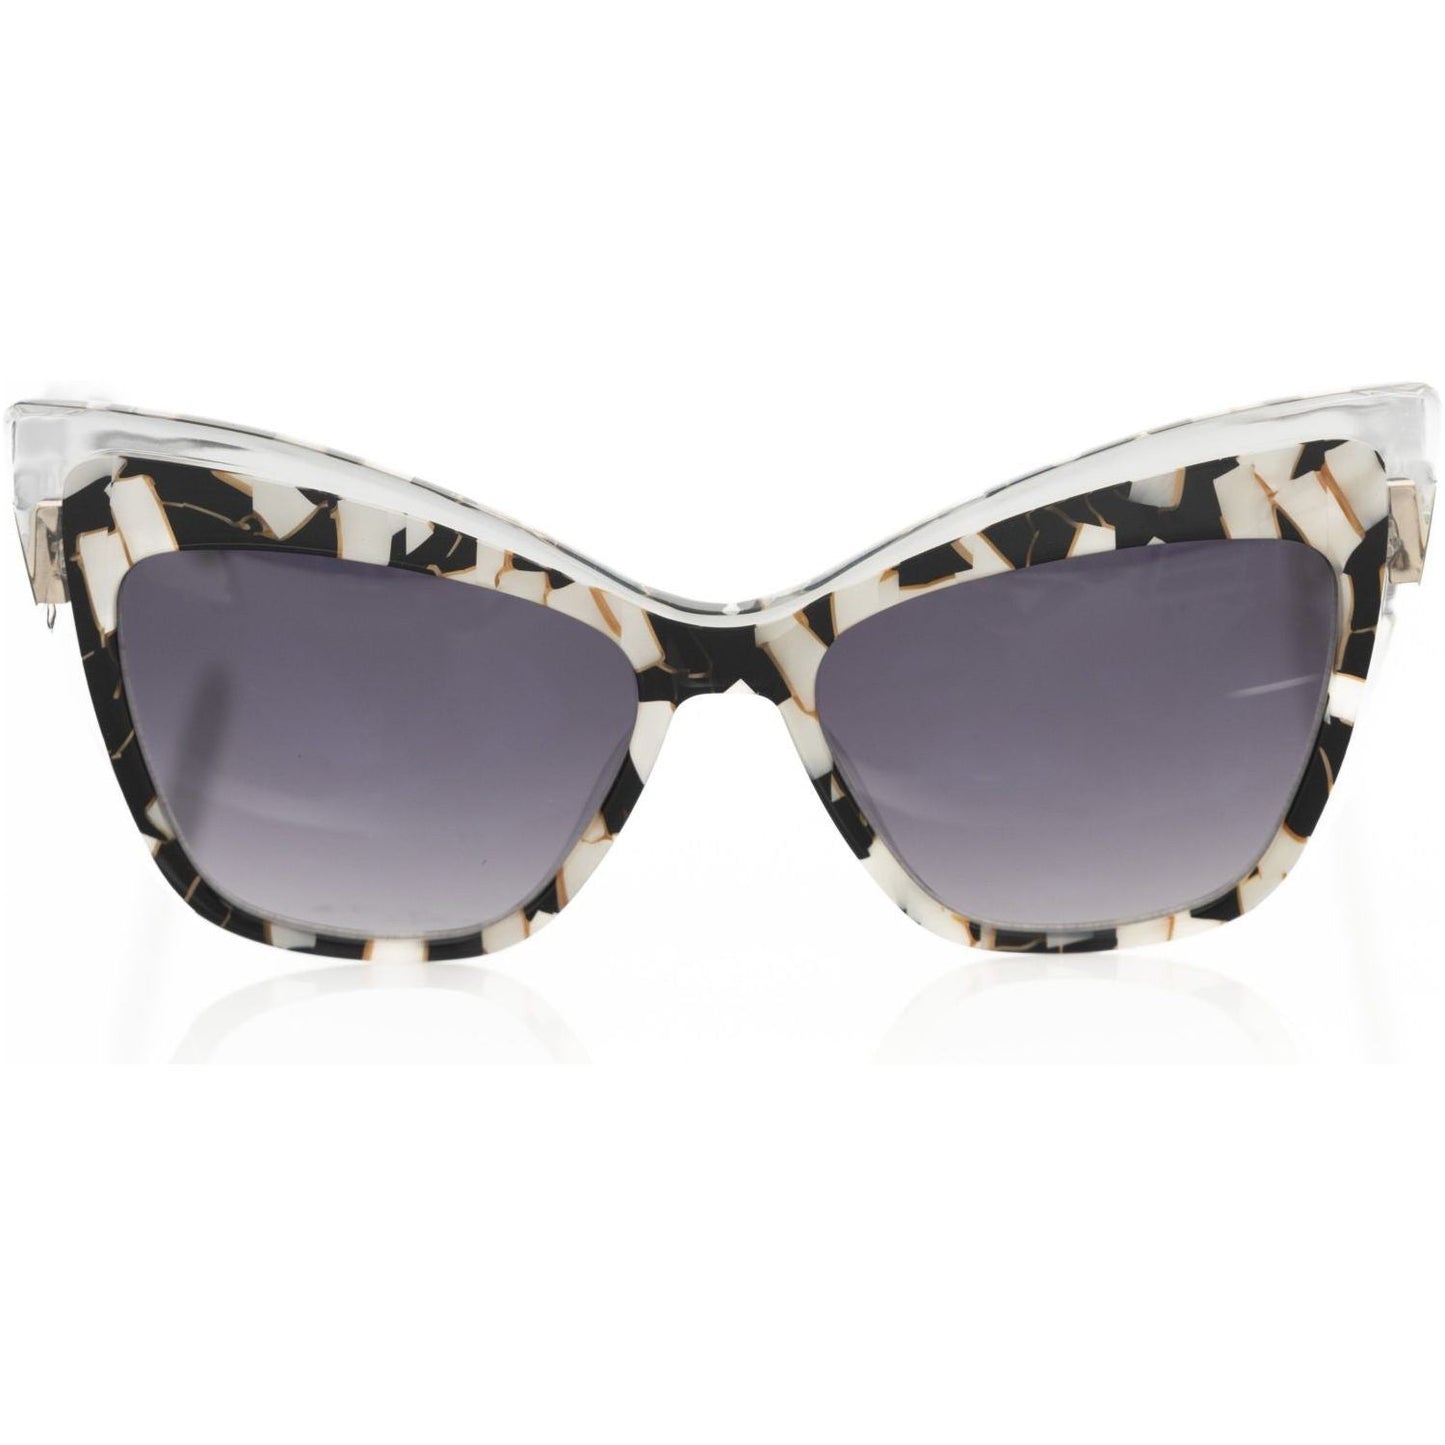 Chic Cat Eye Sunglasses with Pearly Accent Frankie Morello